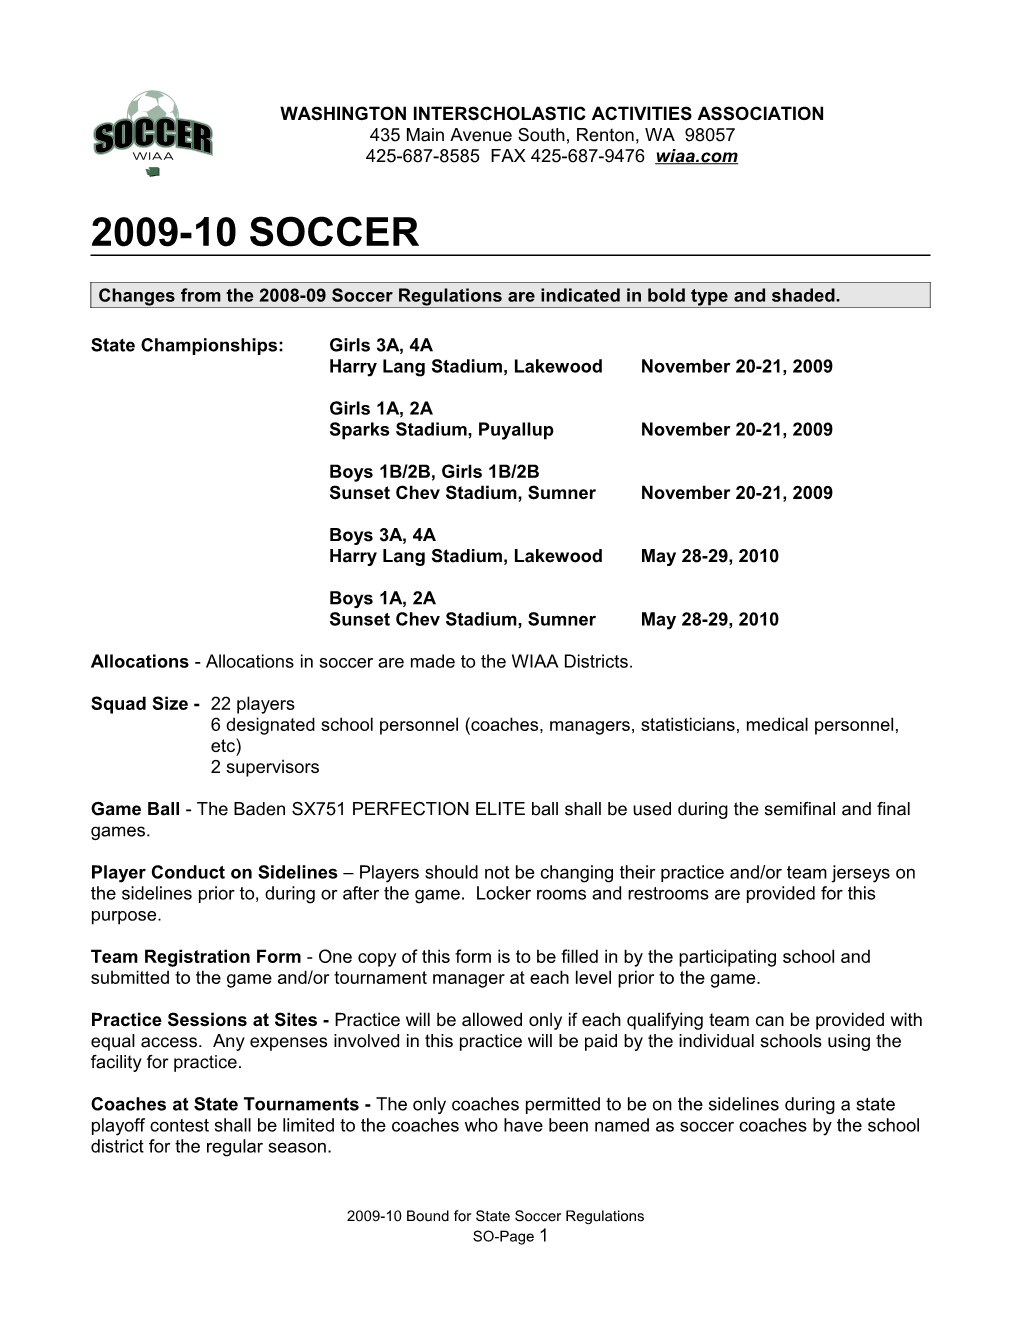 Changes from the 2008-09 Soccer Regulations Are Indicated in Bold Type and Shaded